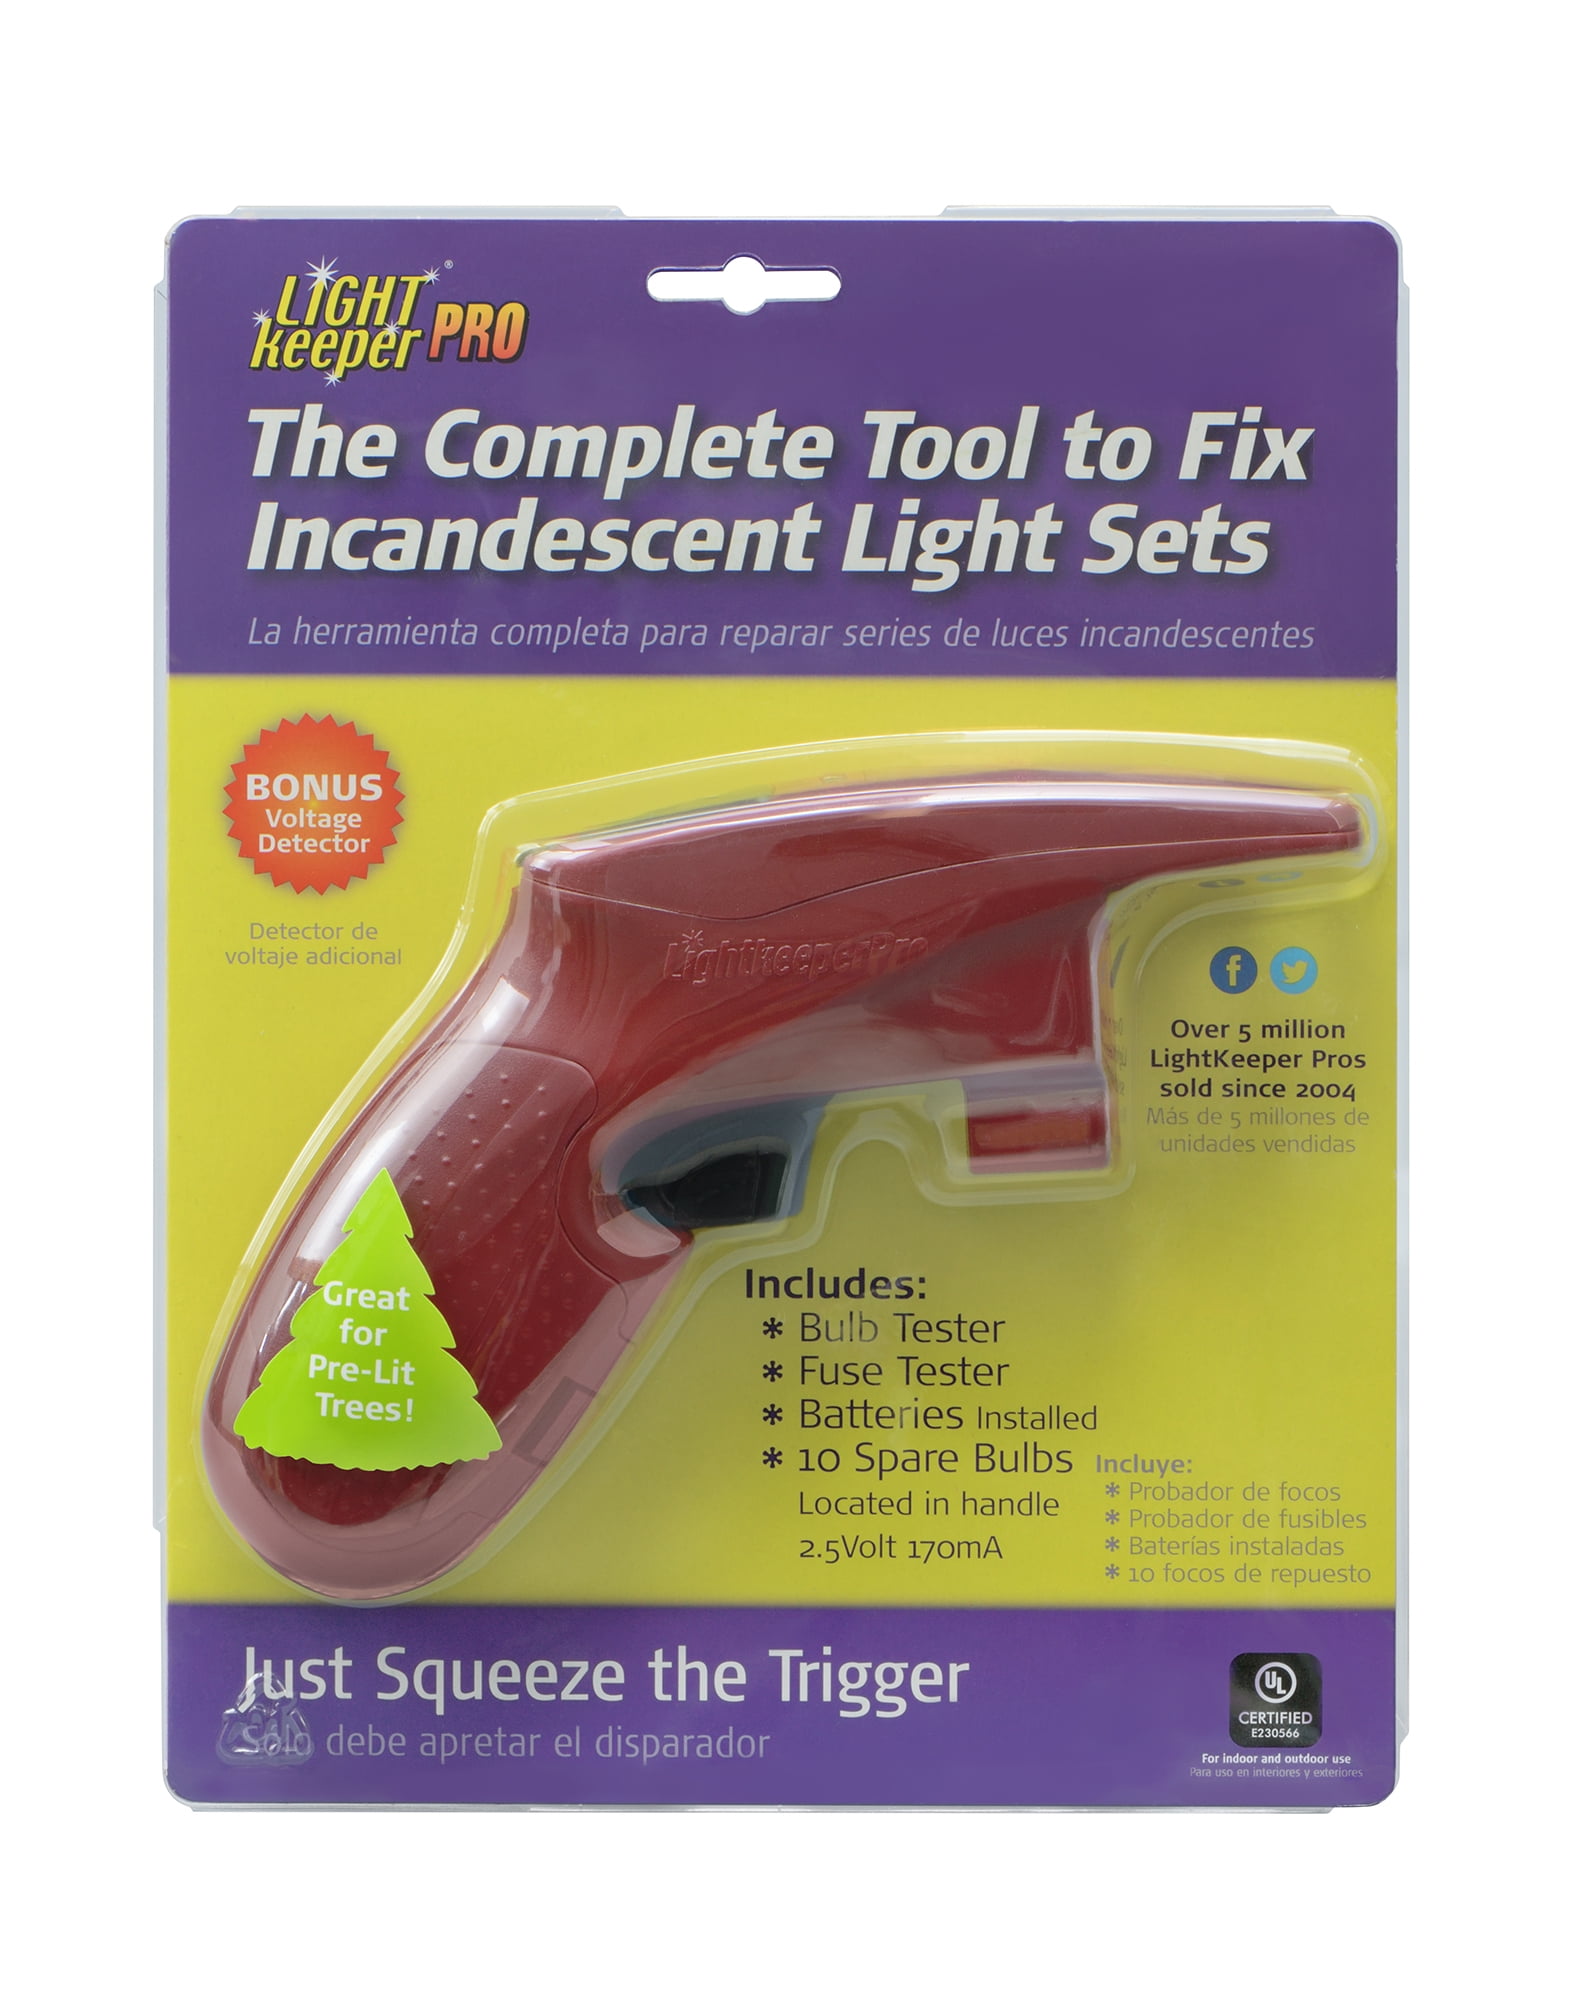 Lightkeeper Pro': The gadget to save your Christmas lights this holiday  season, <span class=tnt-section-tag no-link>News</span>